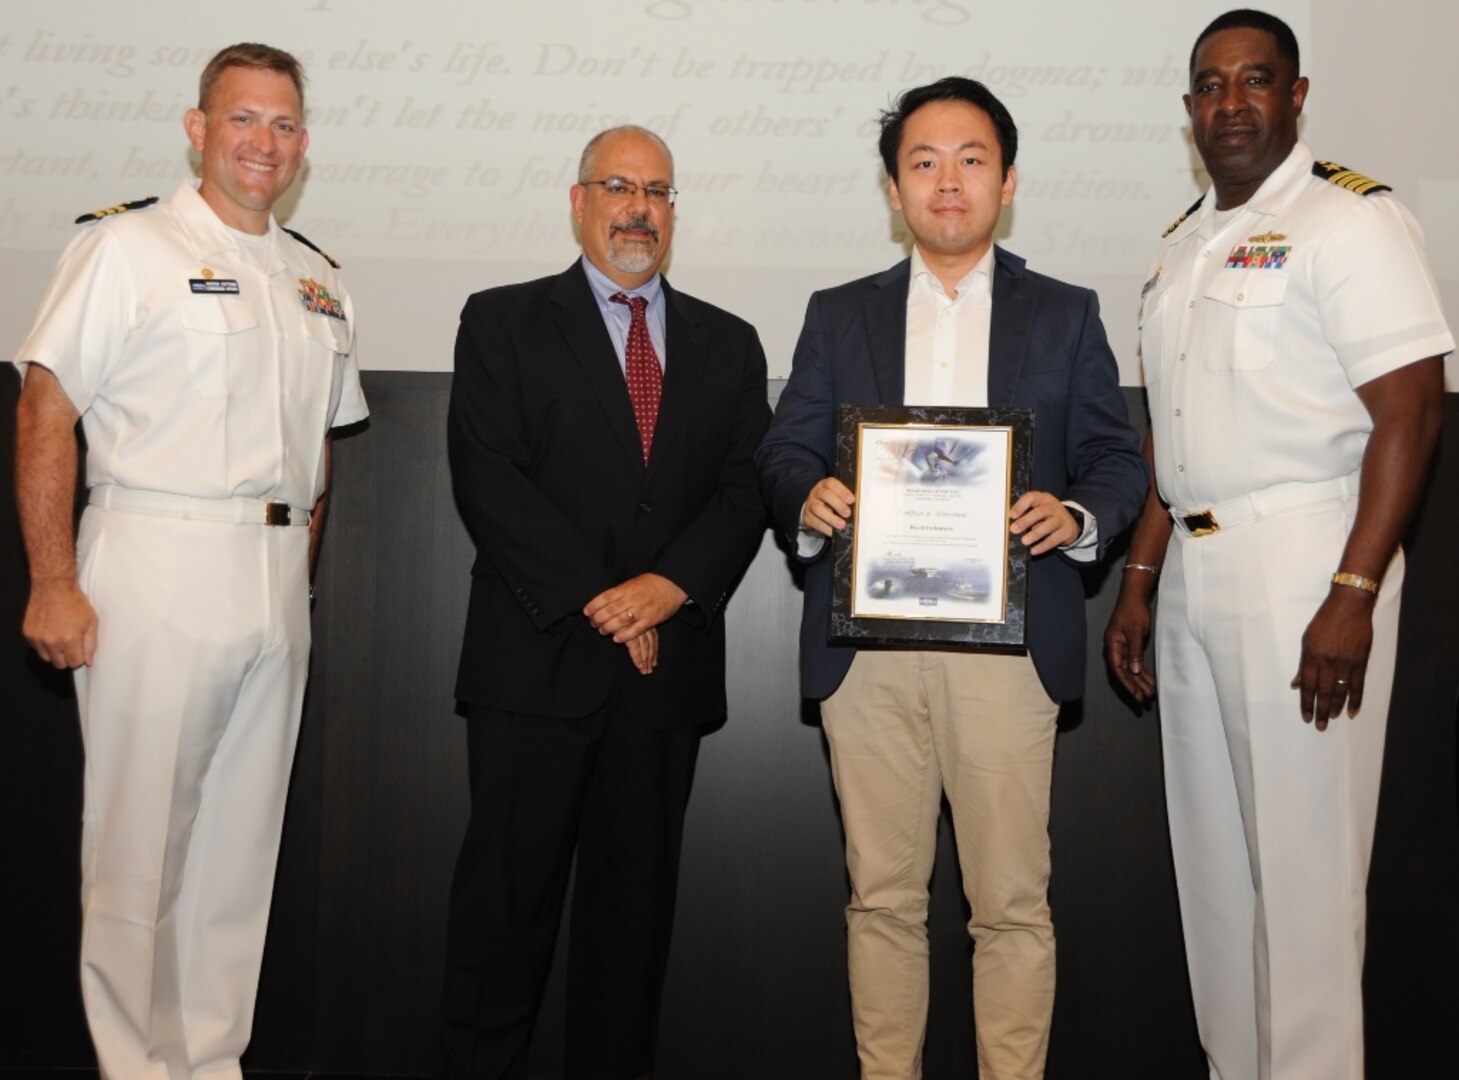 IMAGE: DAHLGREN, Va. - David Ferlemann receives his certificate of achievement from Naval Surface Warfare Center Dahlgren Division (NSWCDD) Technical Director John Fiore, NSWCDD Commanding Officer Capt. Godfrey 'Gus' Weekes, right, and Combat Direction Systems Activity Dam Neck Commanding Officer Cmdr. Andrew Hoffman at the 2017 NSWCDD academic awards ceremony. Ferlemann was recognized for completing his doctoral degree in computer engineering from the University of Tulsa, and commended for his commitment to personal and professional development.